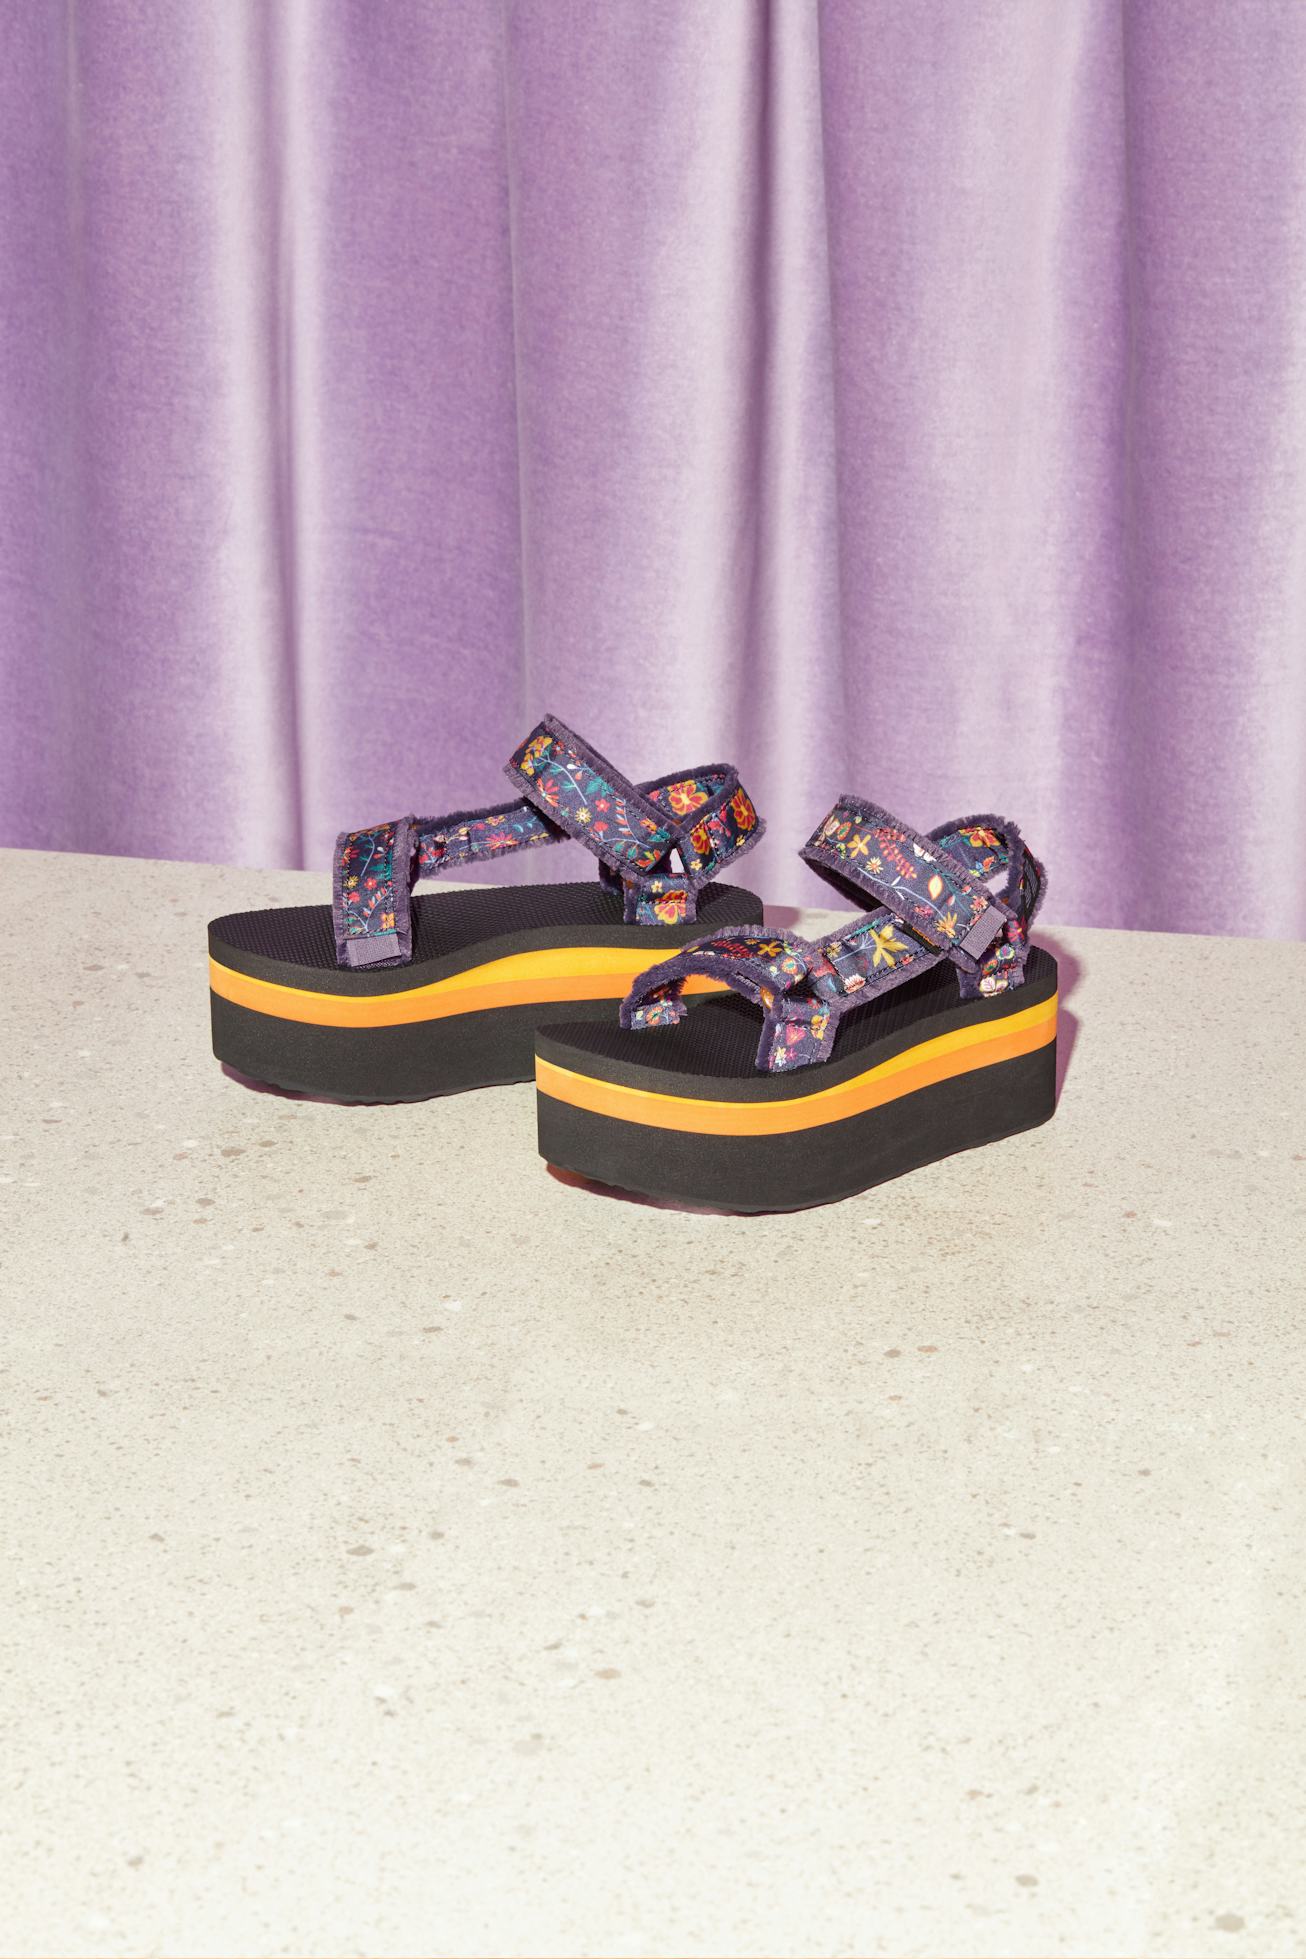 Teva's collaboration with Anna Sui